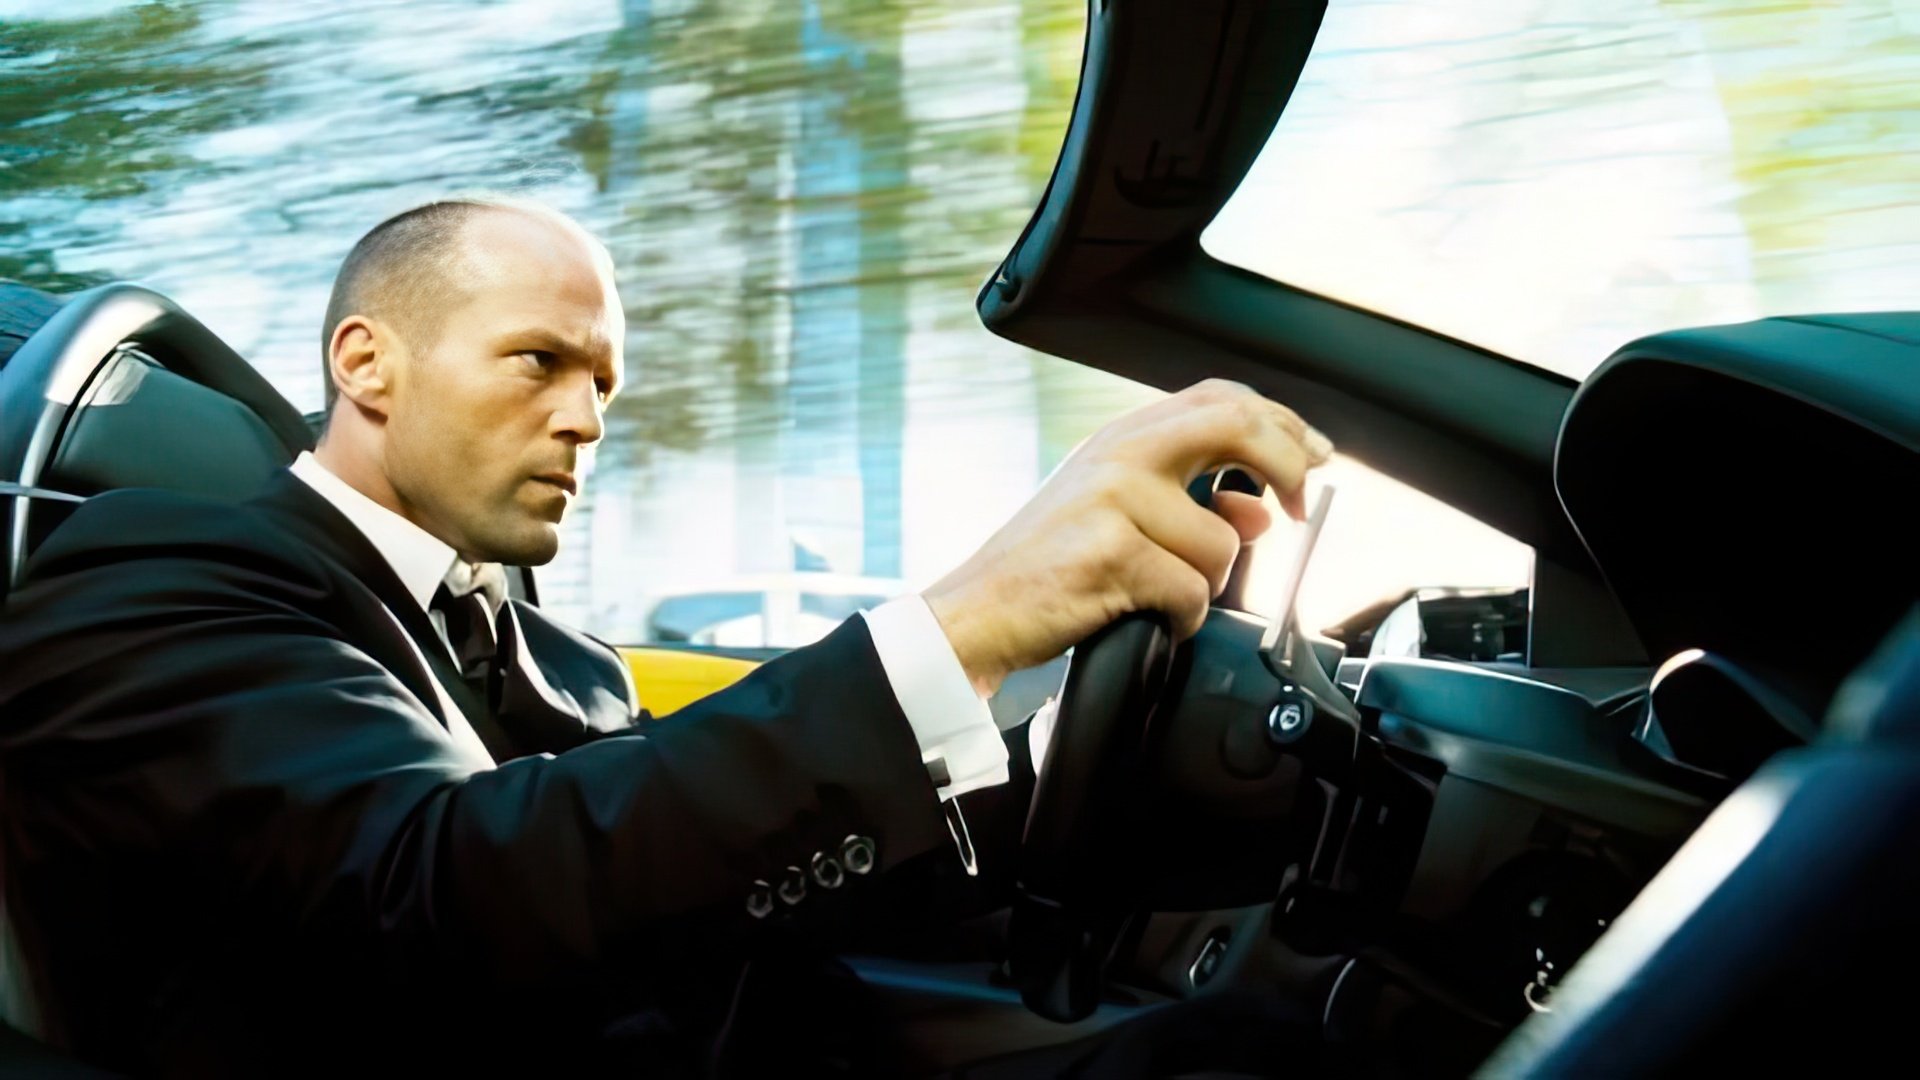 «The Transporter» is one of the brightest moments in Jason Statham’s filmography